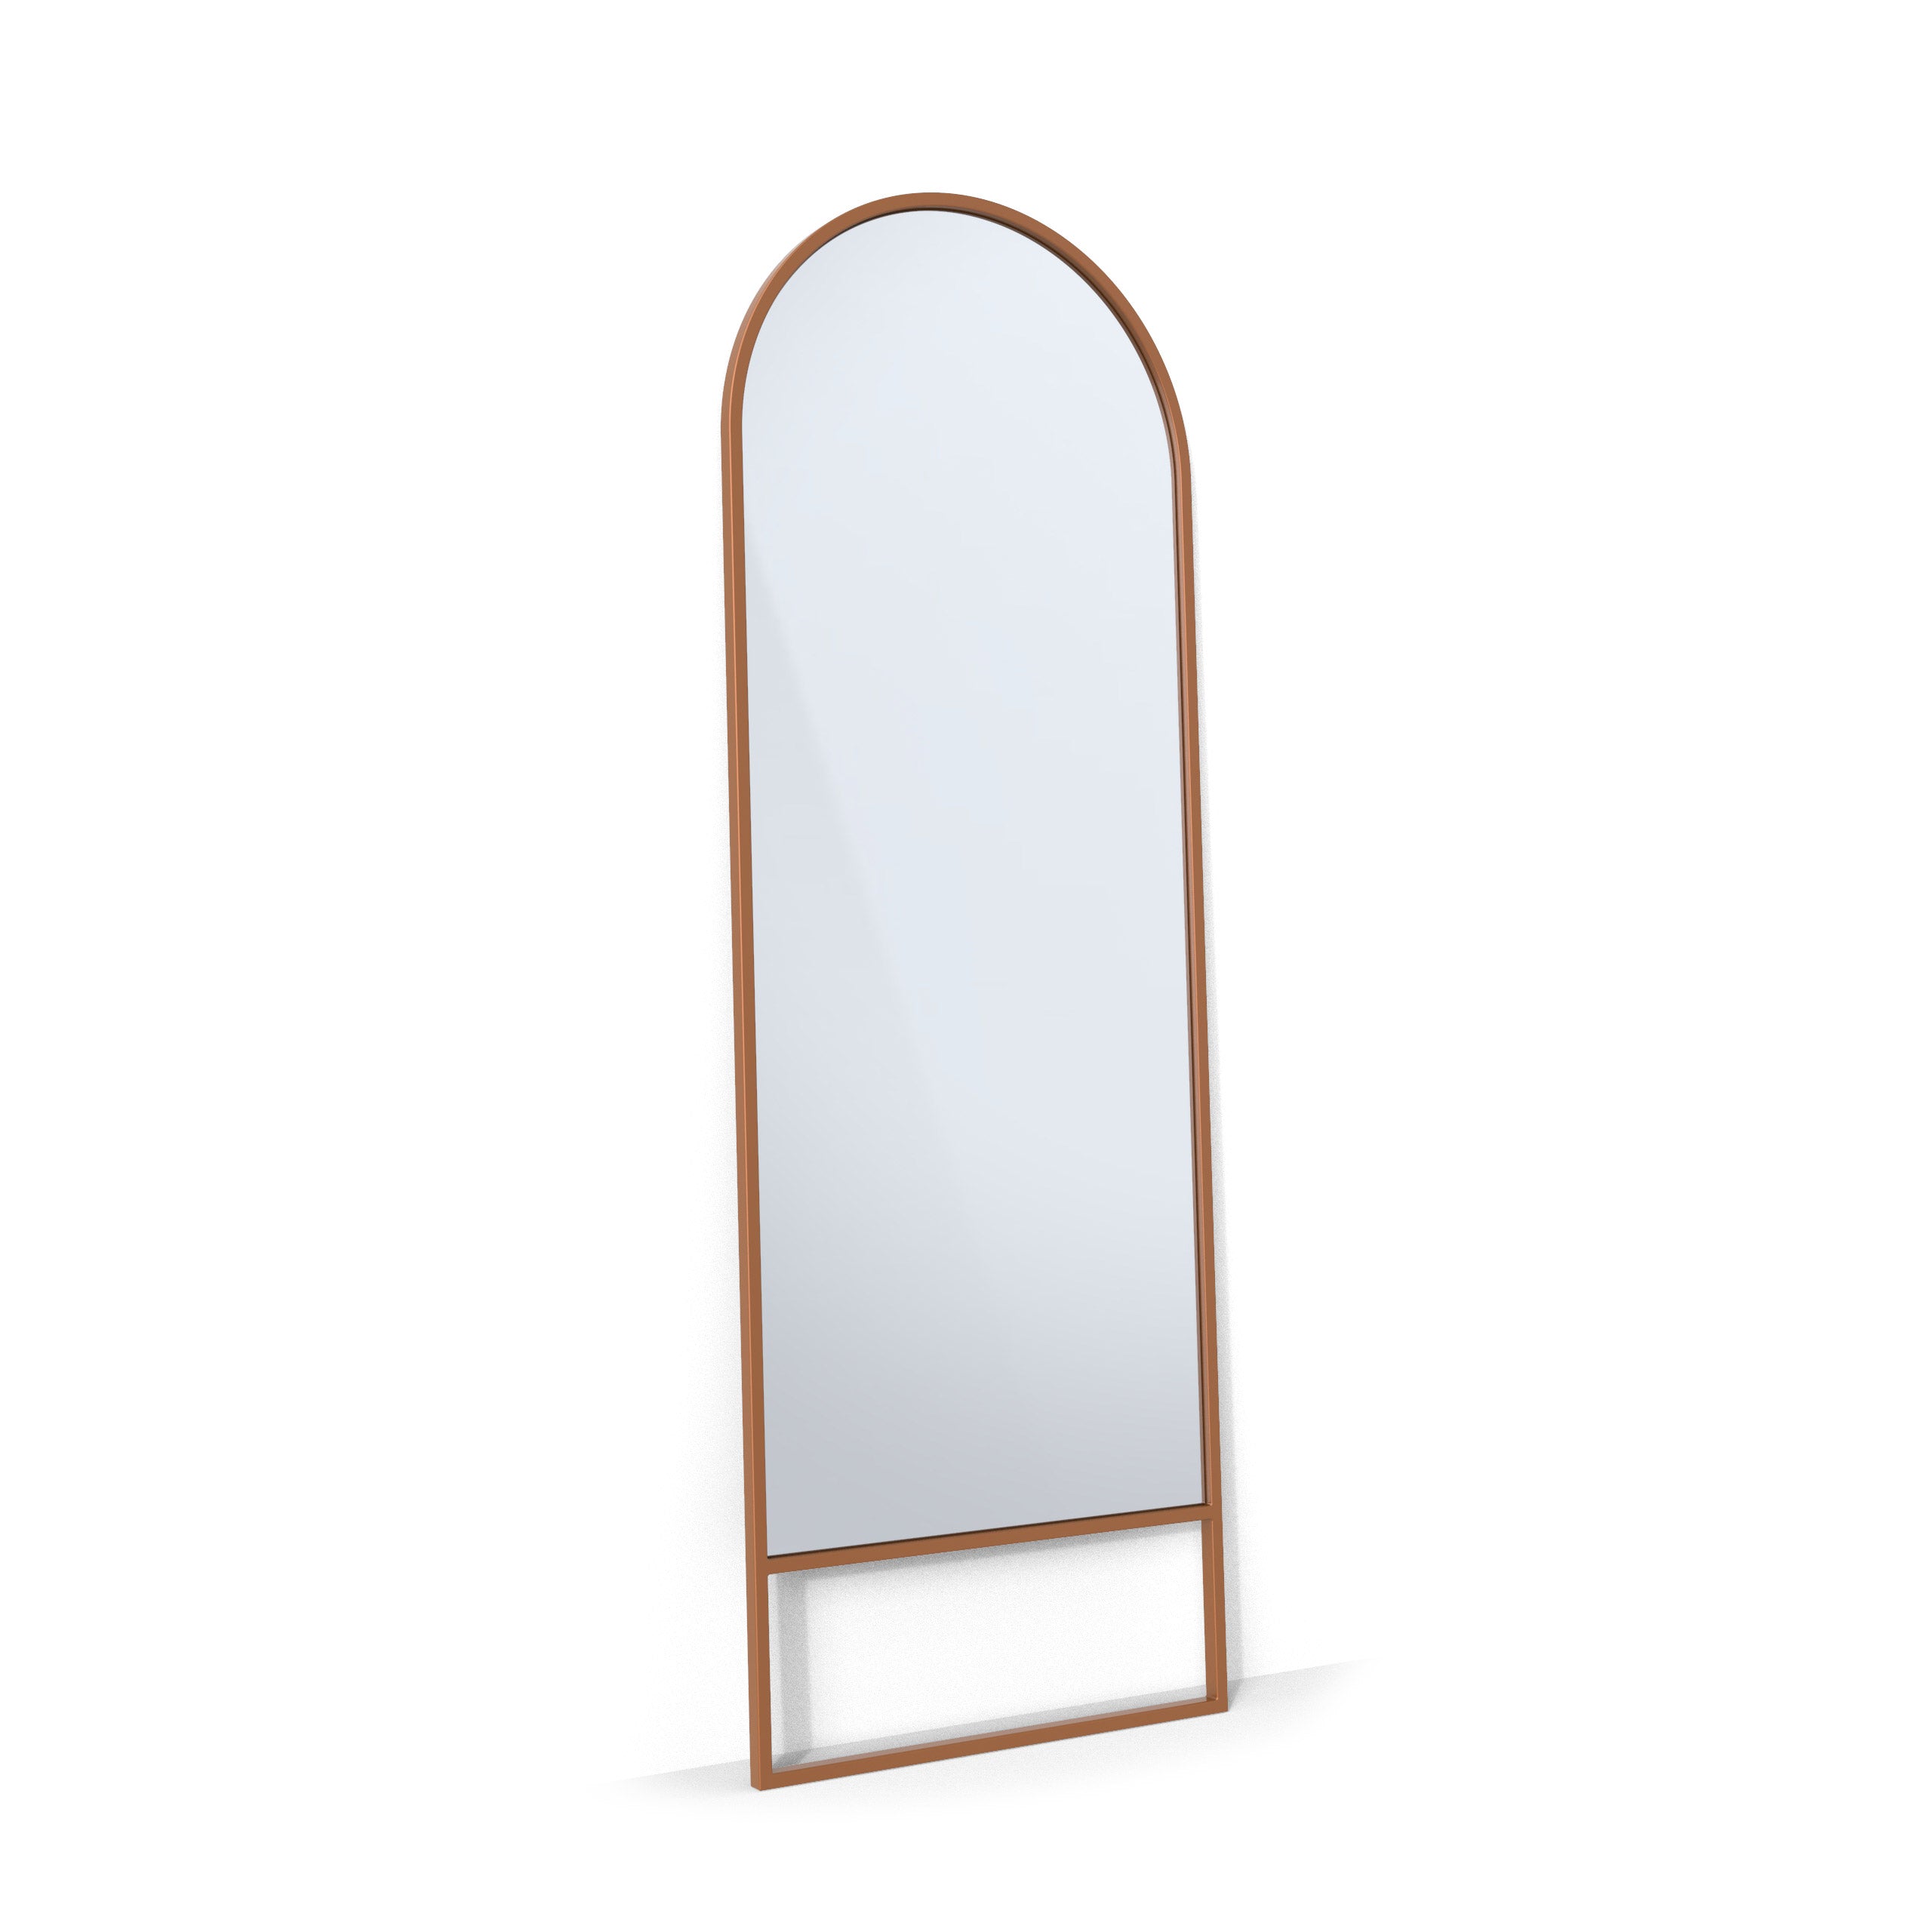 Appo Leaning Mirror - Arch